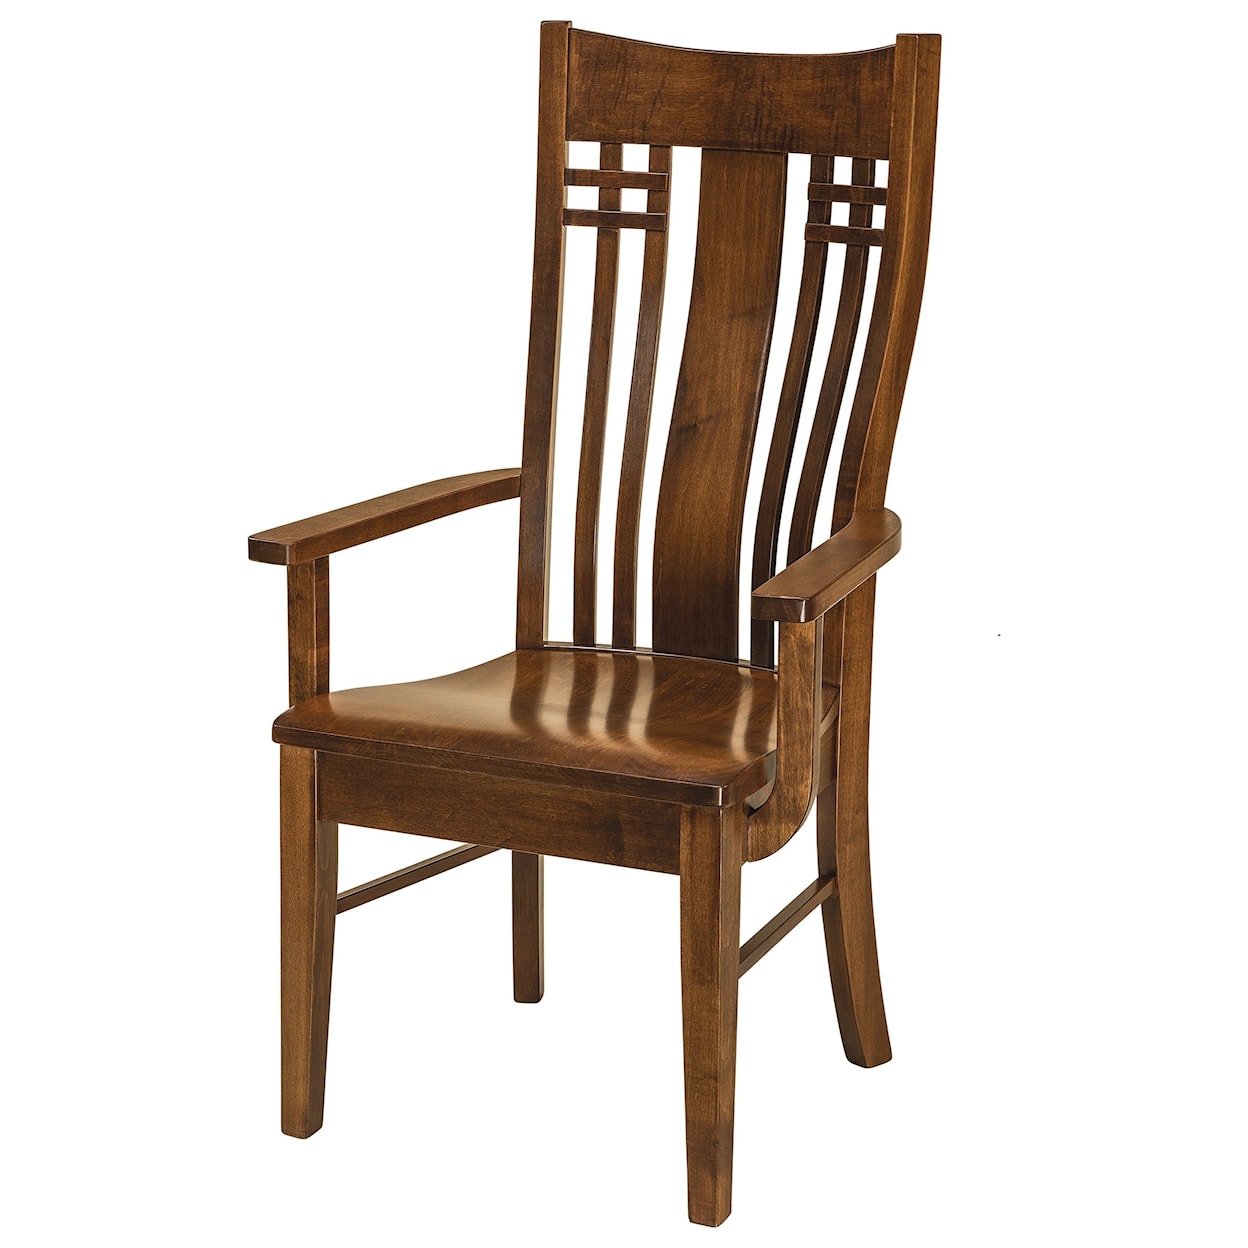 F&N Woodworking Bennet Arm Chair - Wood Seat